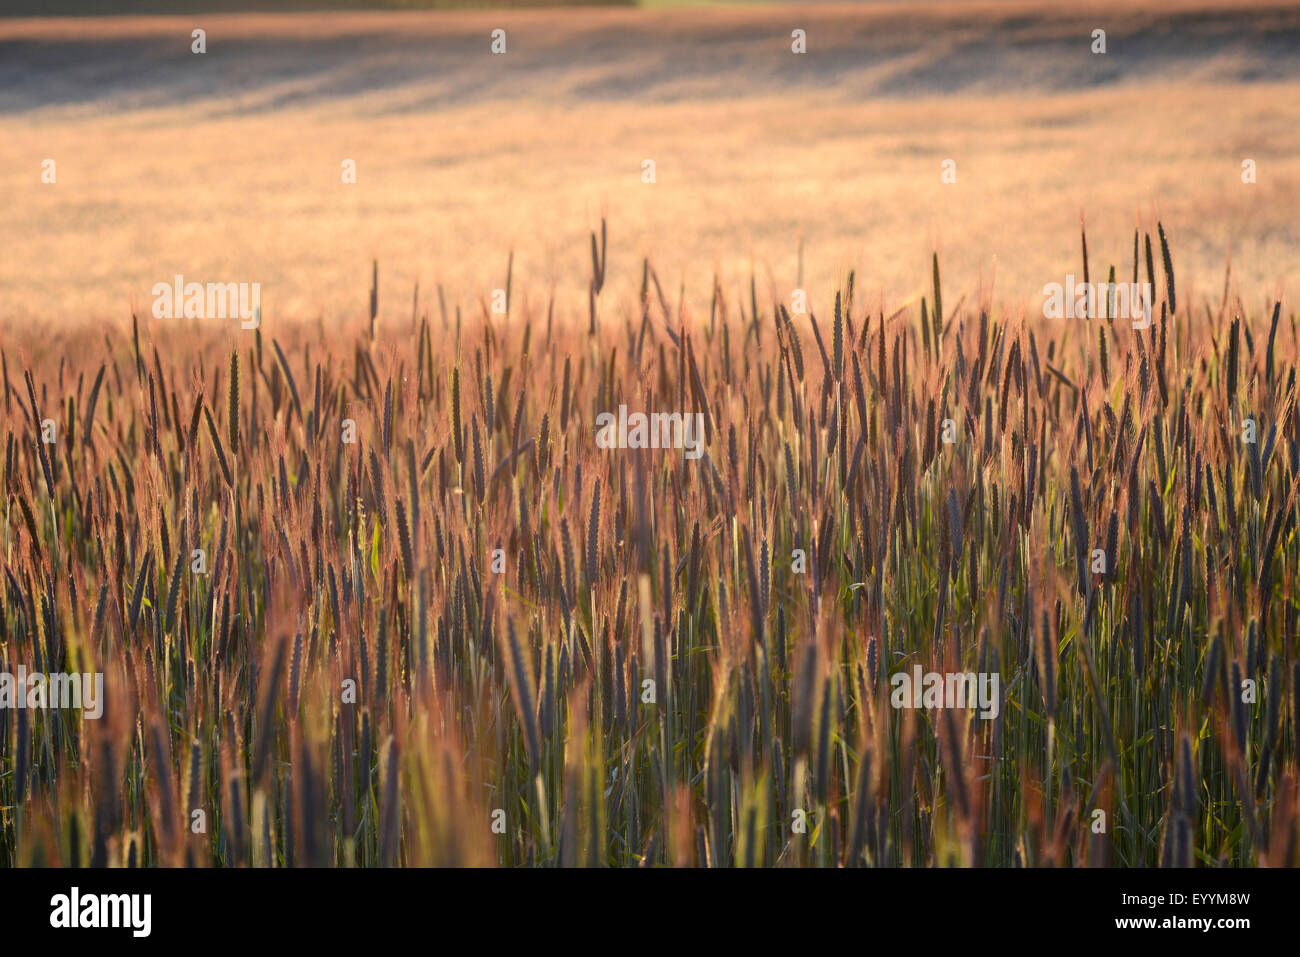 cultivated rye (Secale cereale), rye field in backlight at sunrise, Germany, Bavaria Stock Photo